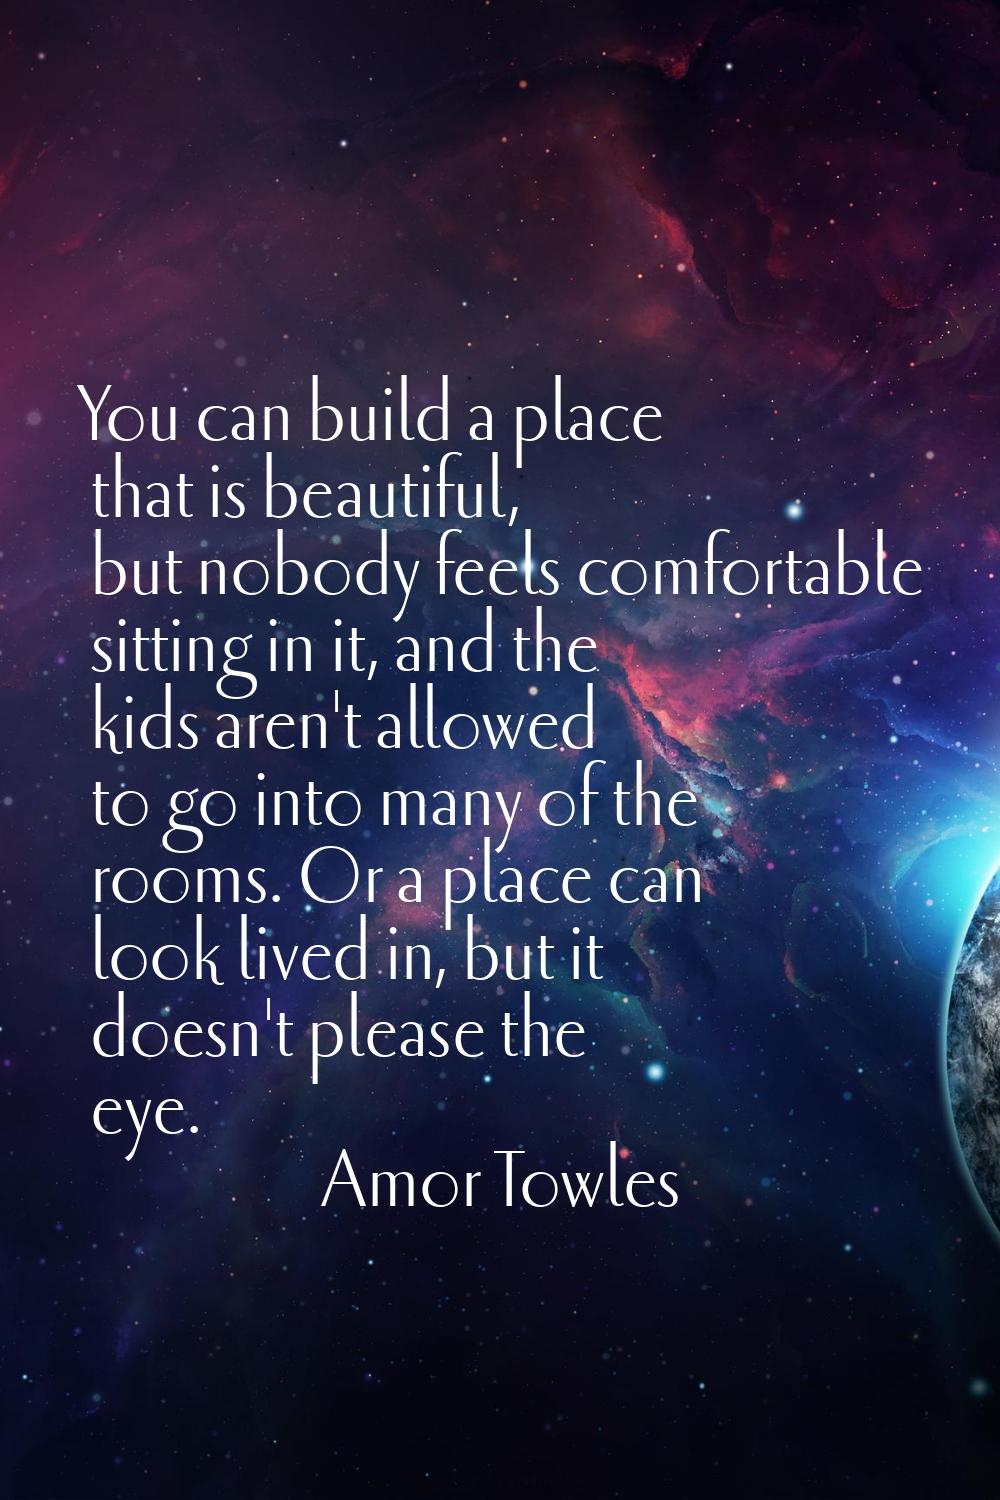 You can build a place that is beautiful, but nobody feels comfortable sitting in it, and the kids a